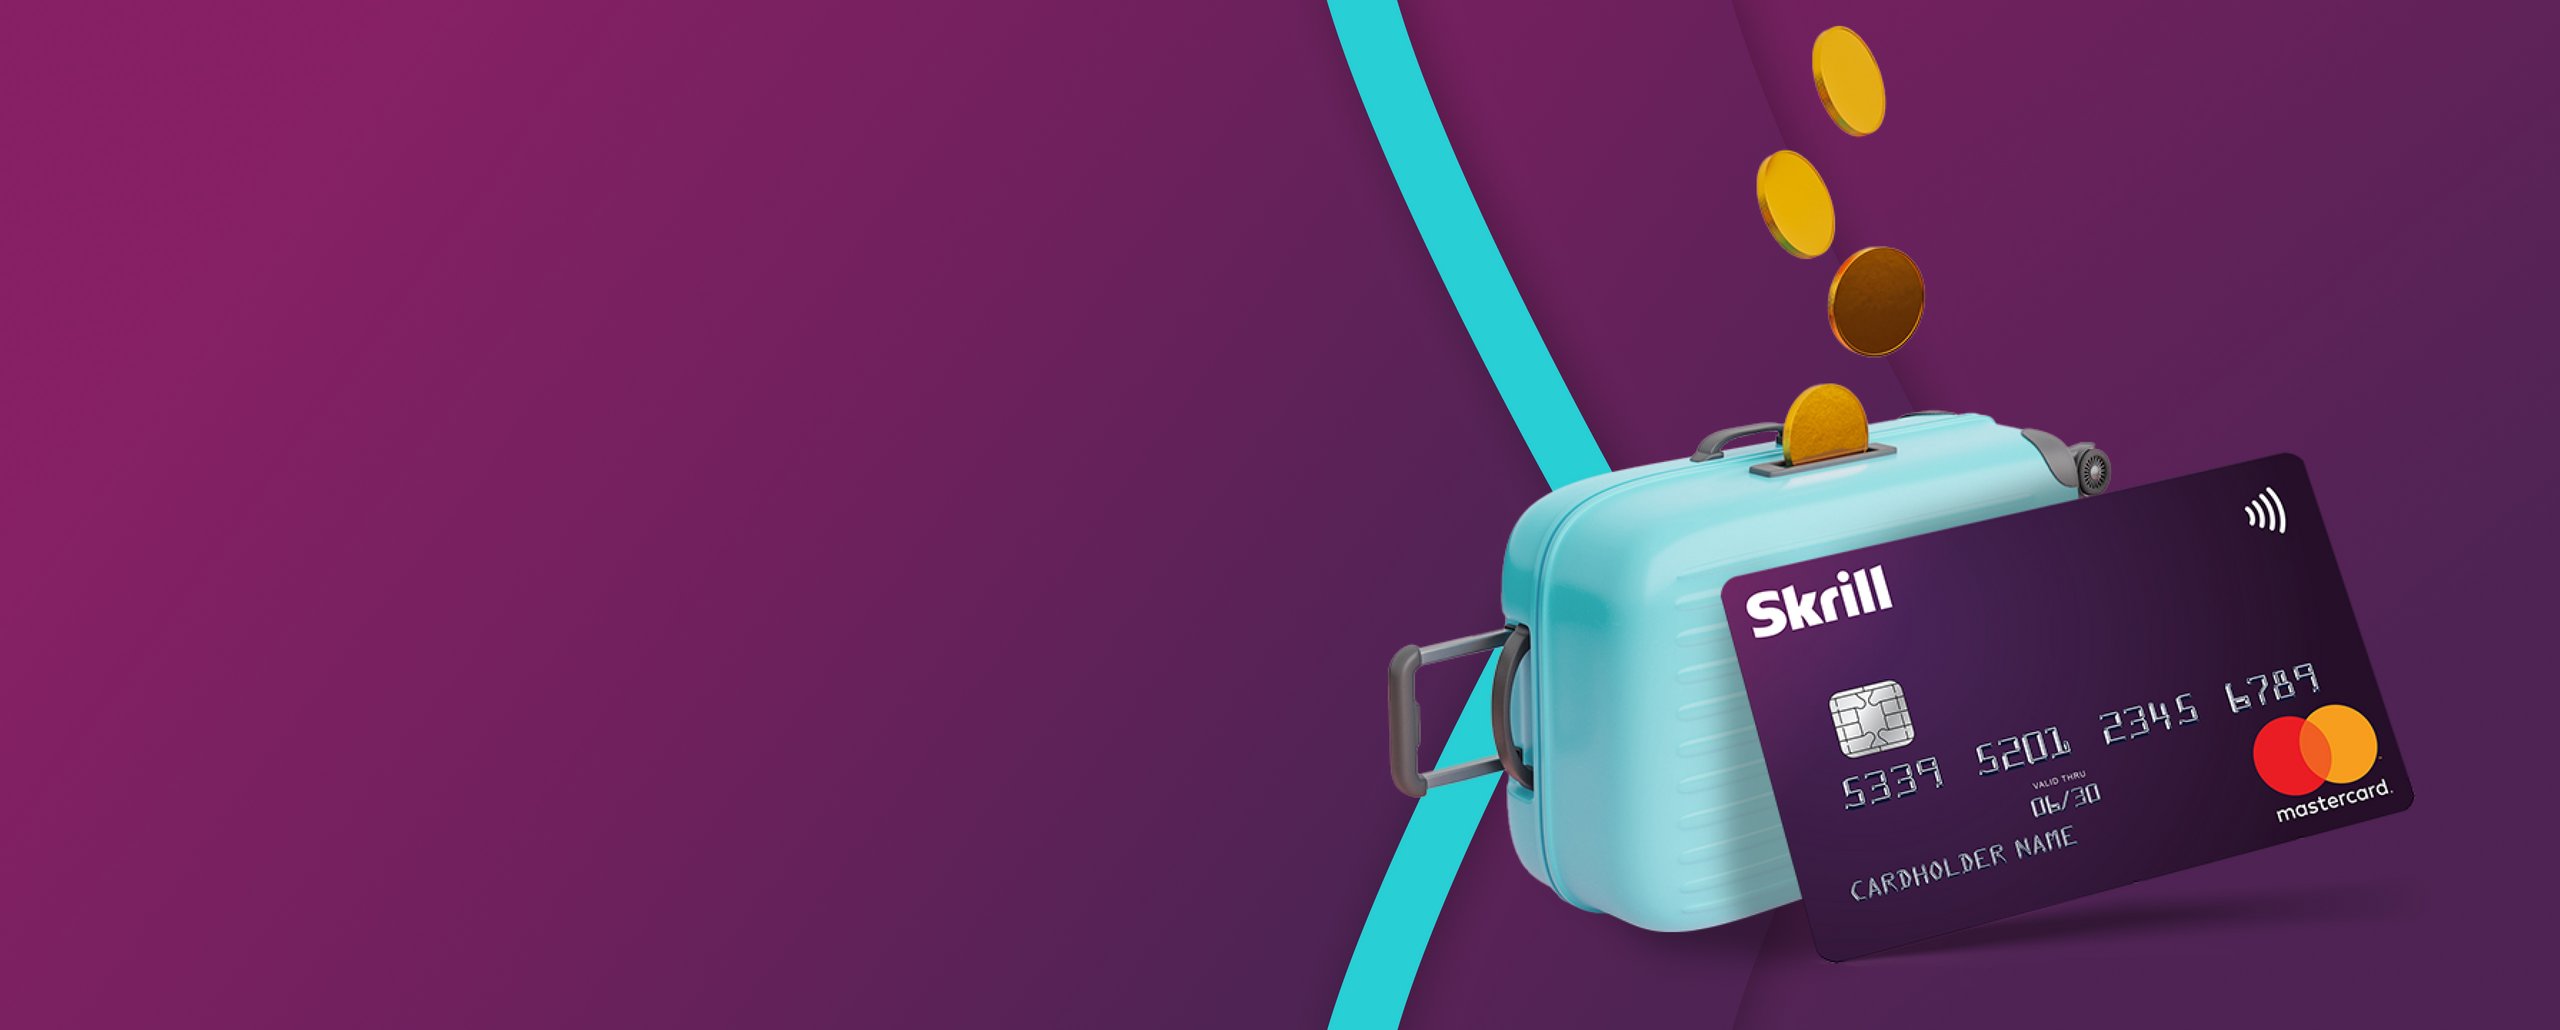 Skrill Prepaid Mastercard with suitcase and money coins